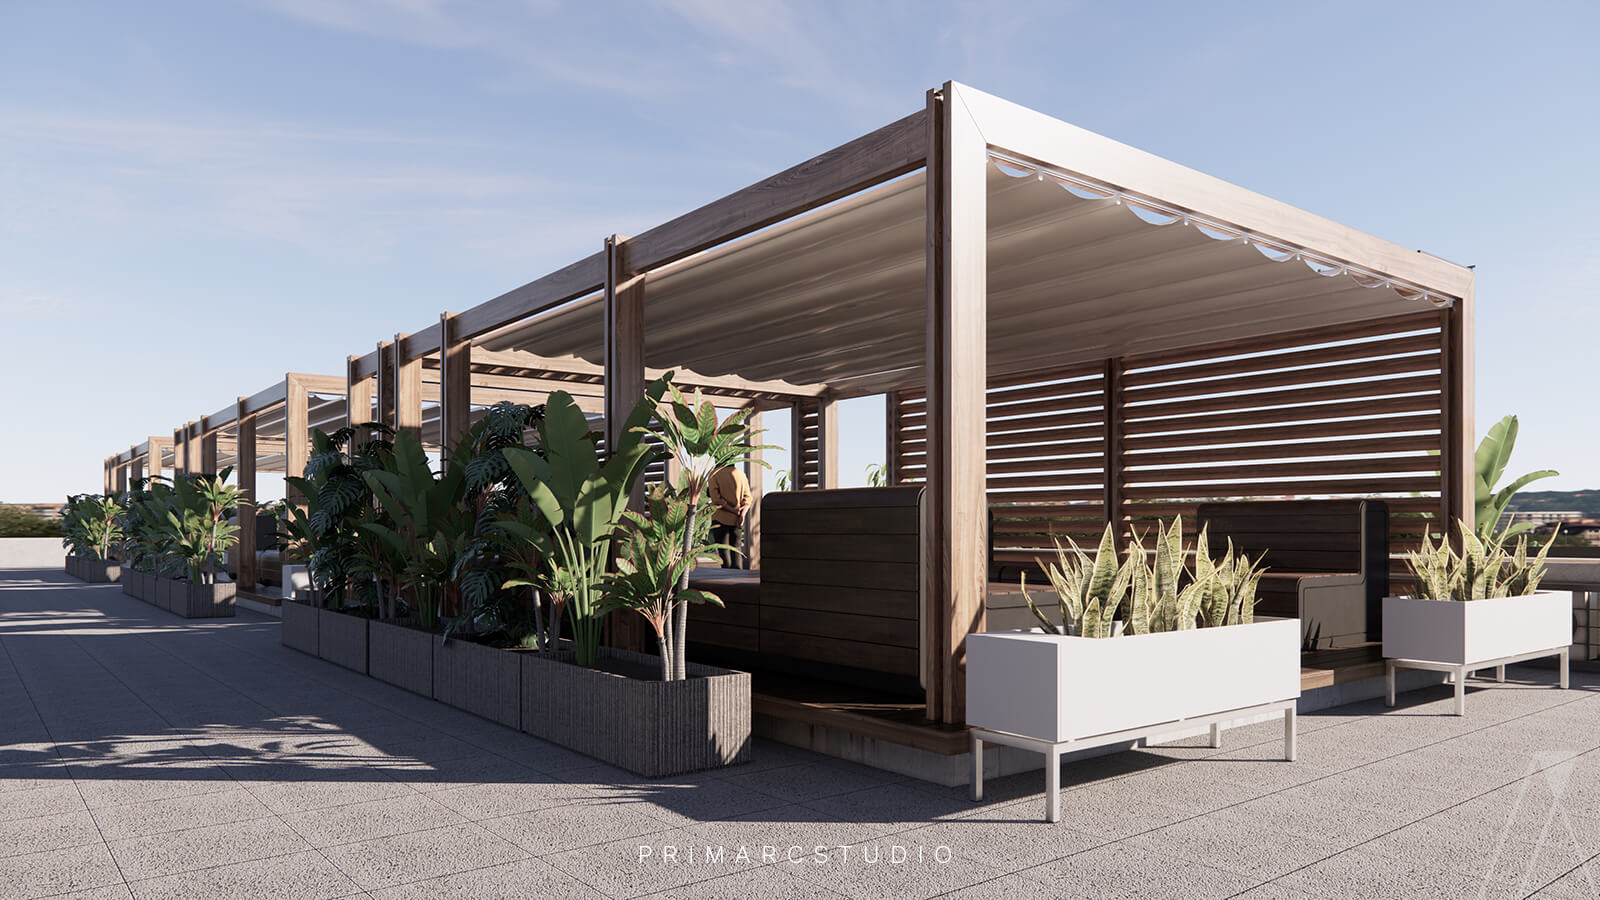 Sitting area with planters on the roof